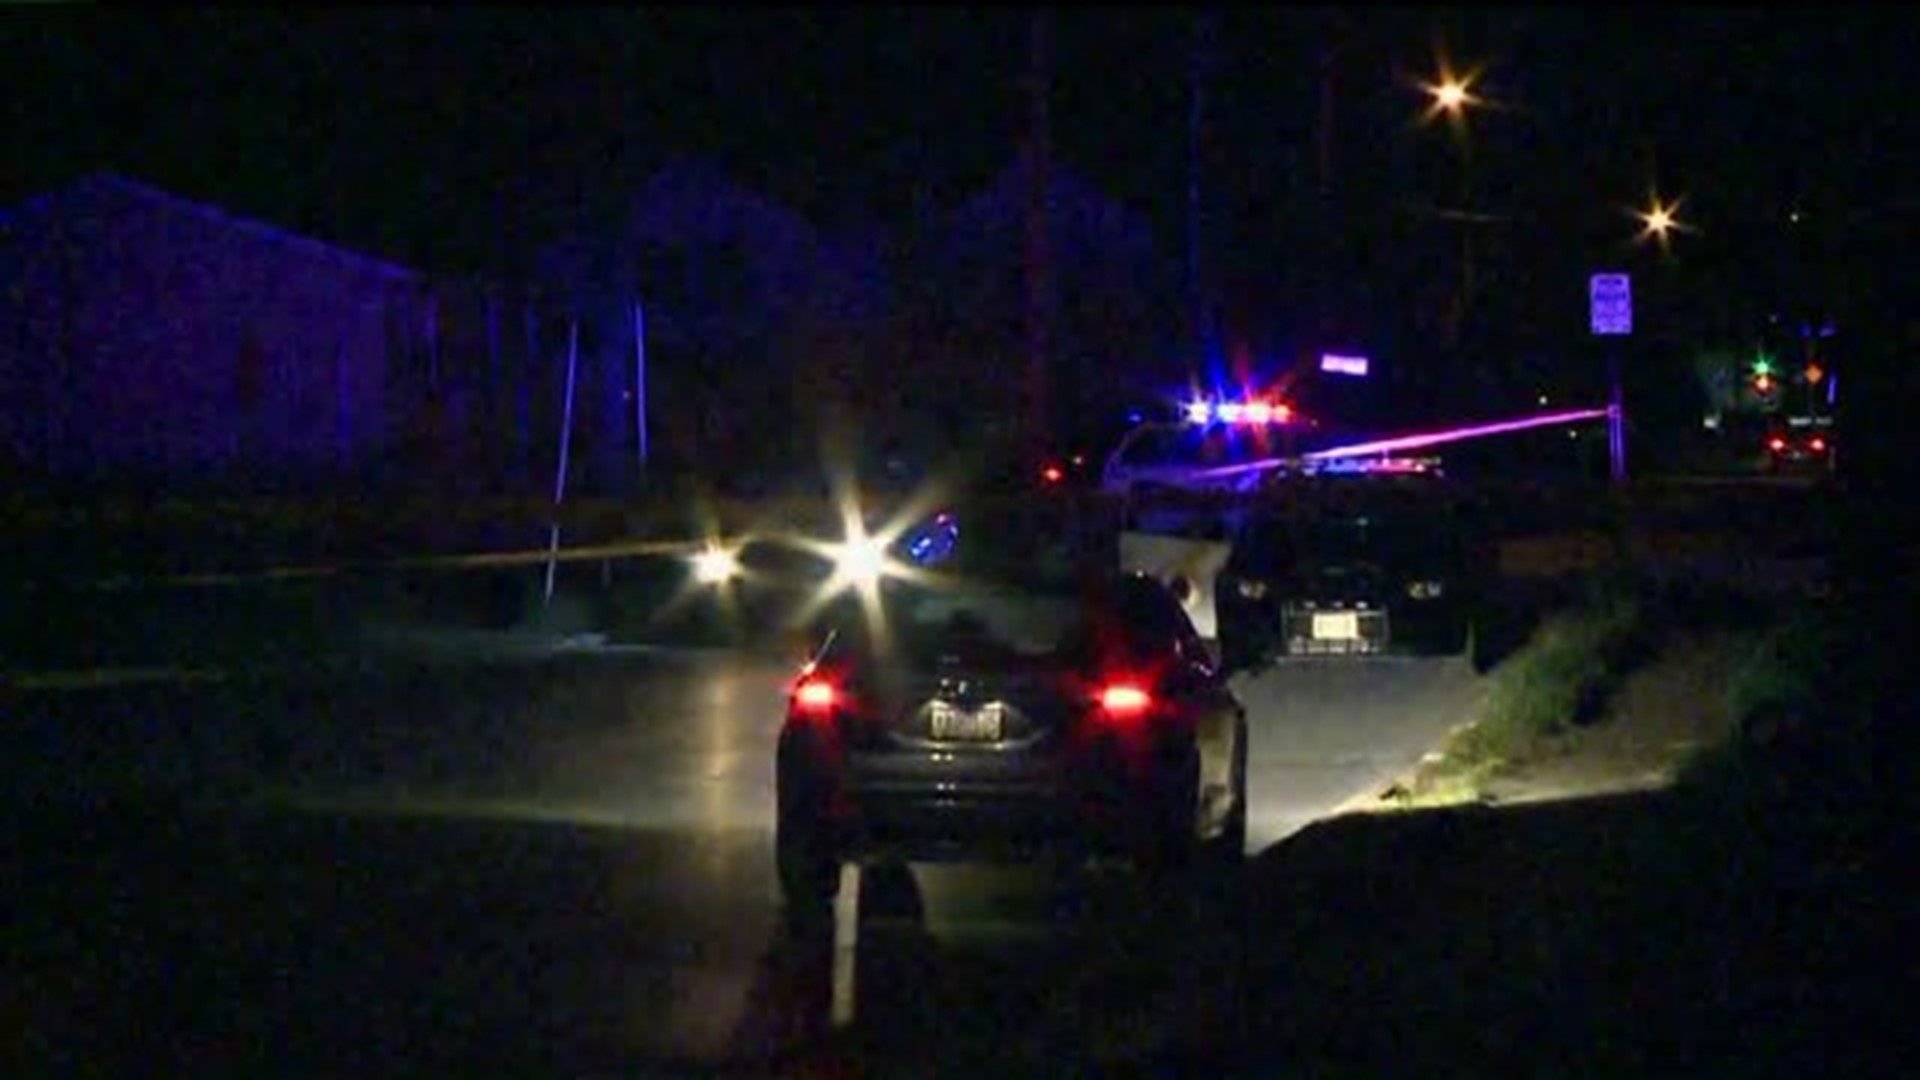 UPDATE: Police ID Man, Woman Killed After Shooting in Williamsport